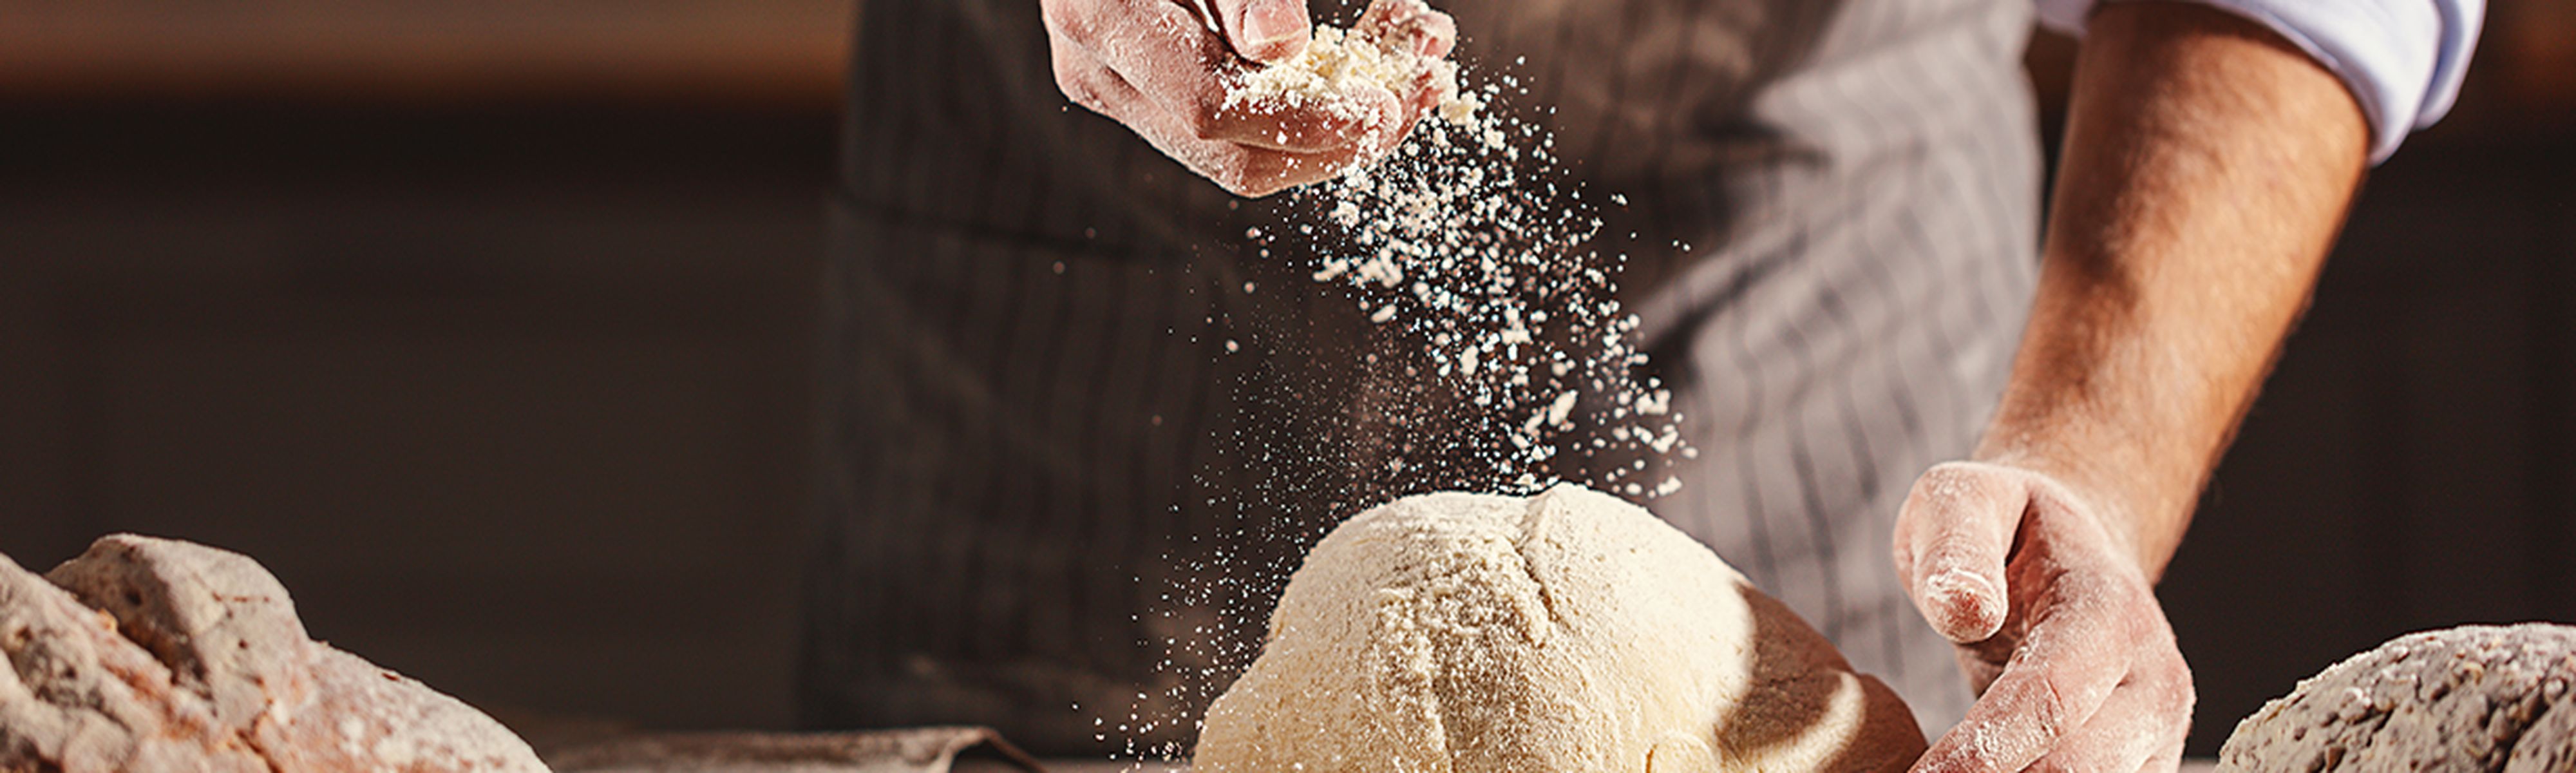 man making bread with flour